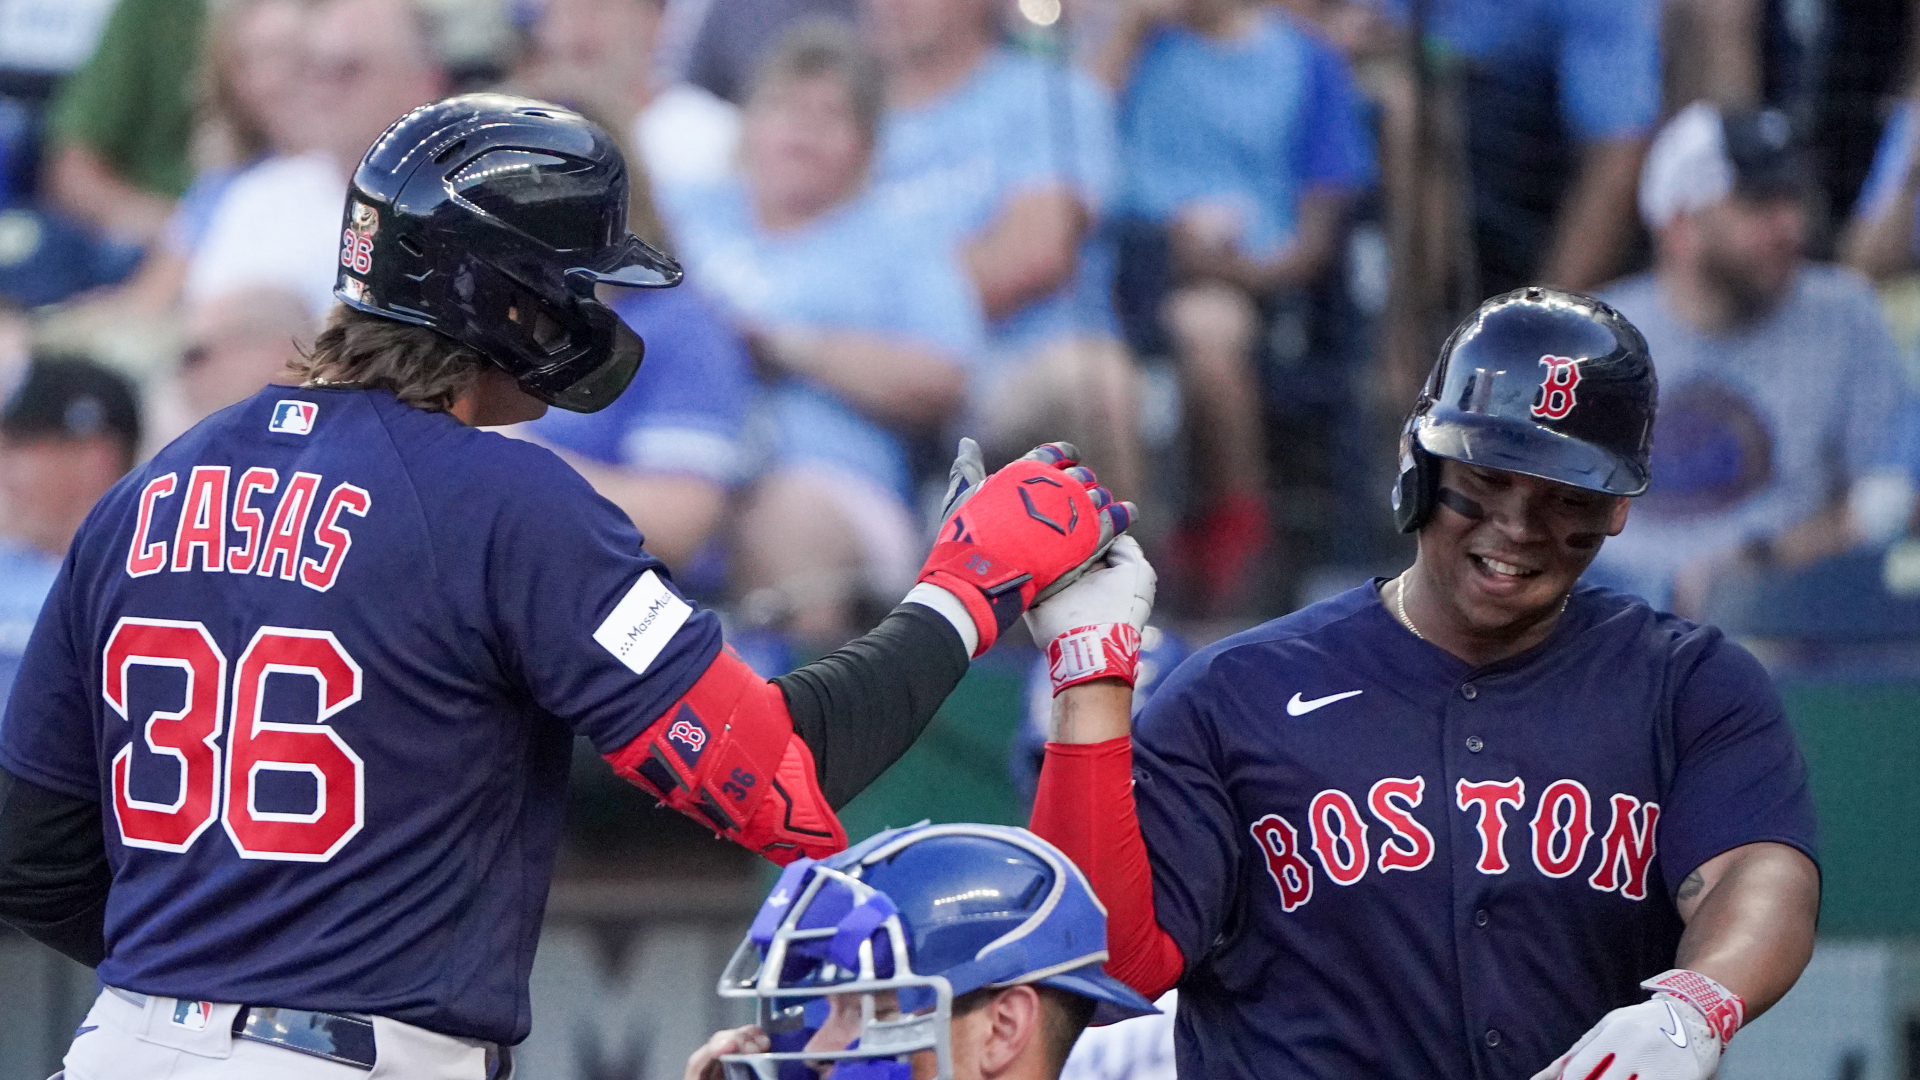 Verdugo delivers big hit as Red Sox rebound against Royals